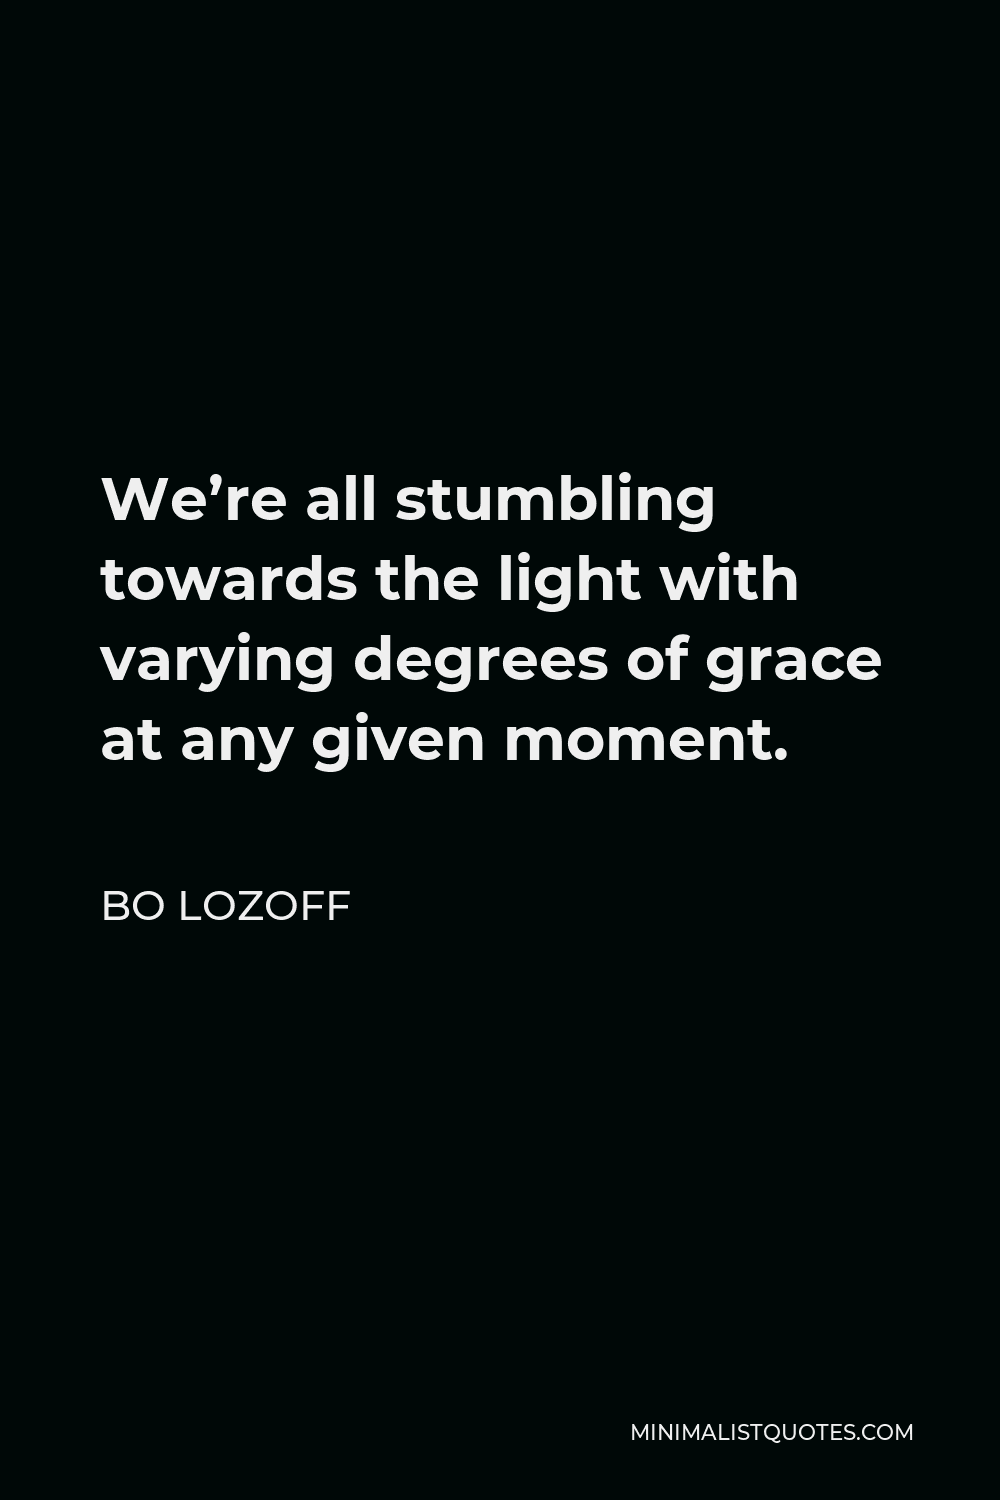 Bo Lozoff Quote - We’re all stumbling towards the light with varying degrees of grace at any given moment.